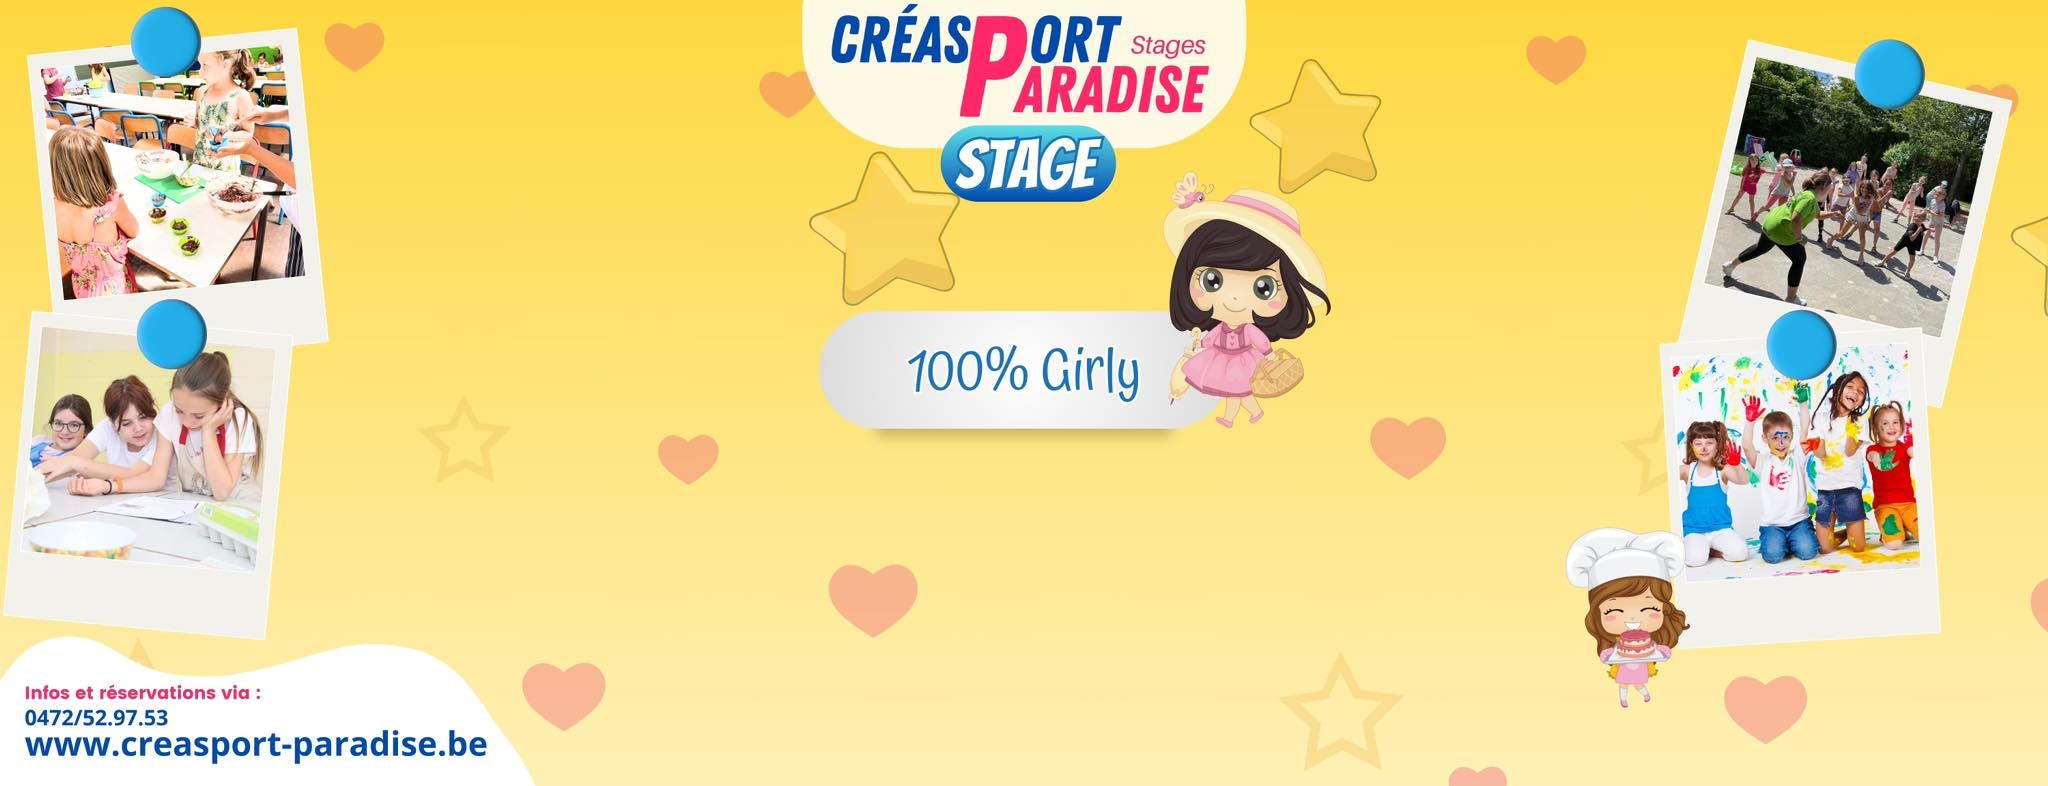 Stage 100% Girly